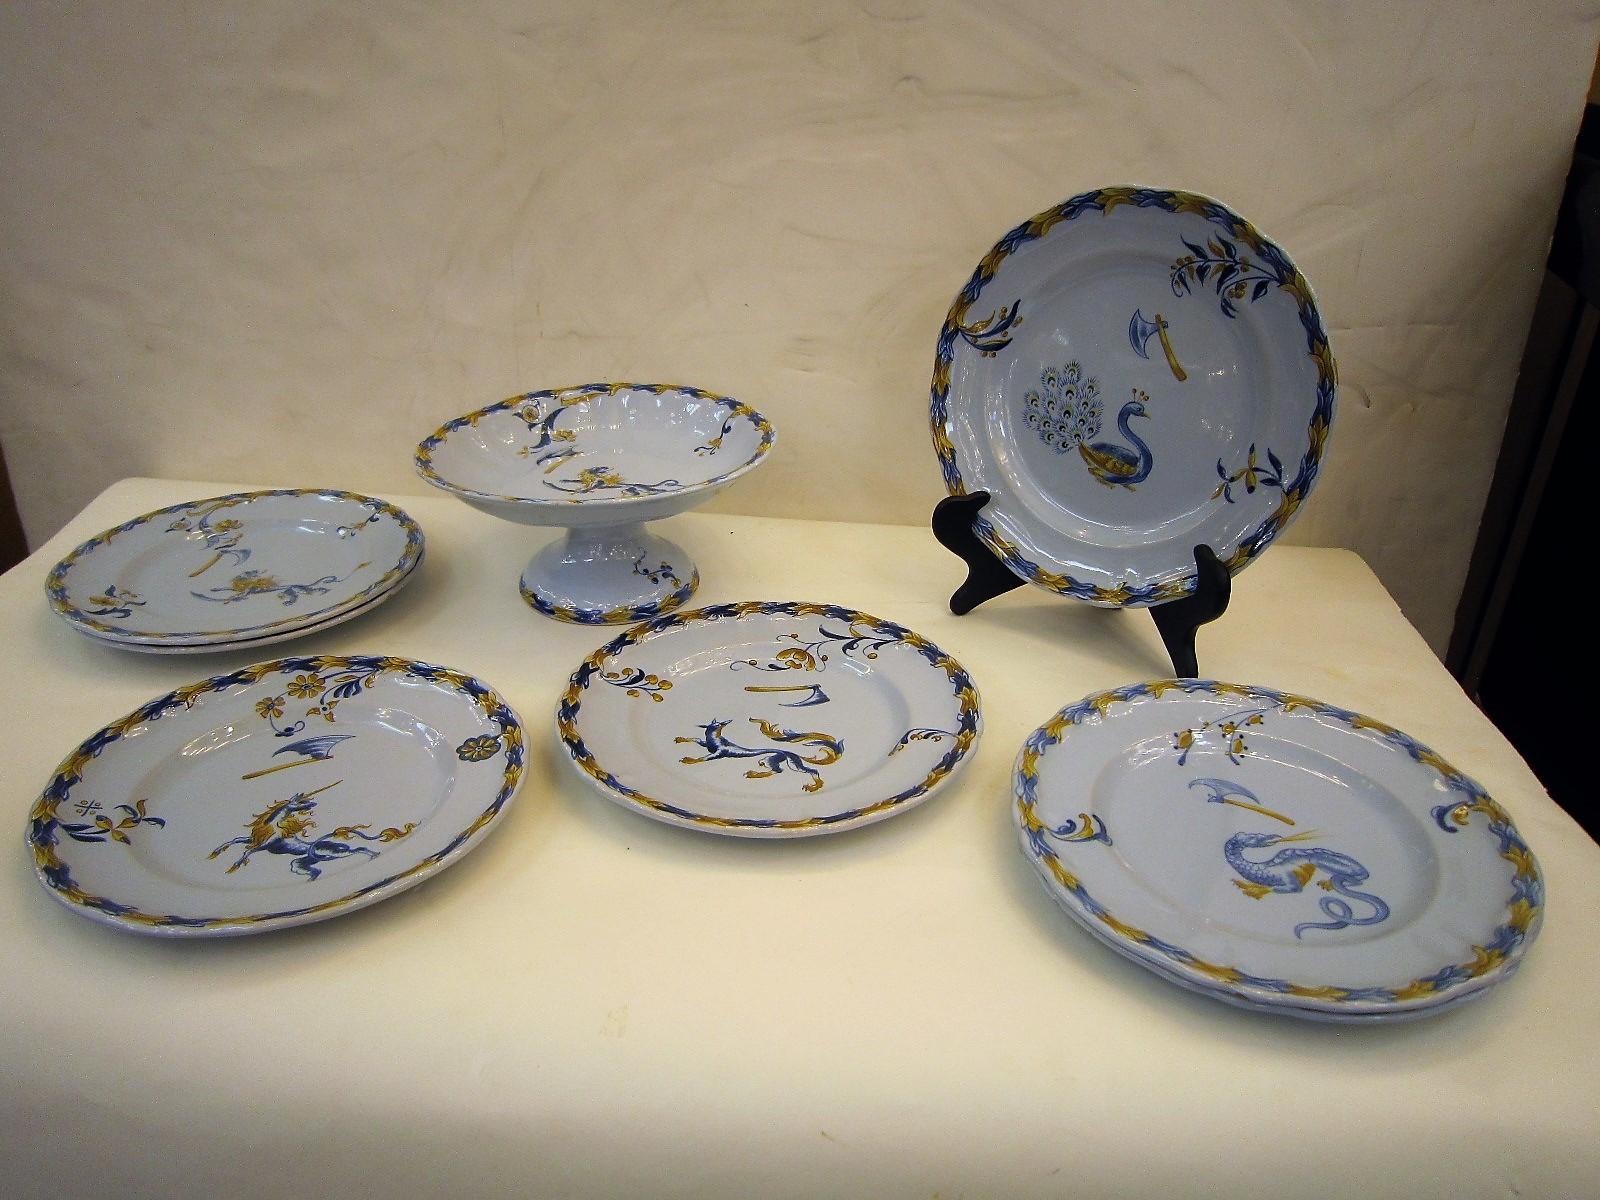 An unusual serving set of seven plates and one compote / footed centrepiece by Emile Galle.
Each piece of antique Faience earthenware is hand signed and numbered E. Galle, Nancy
These hand-painted dishes have scalloped decorative borders in blues